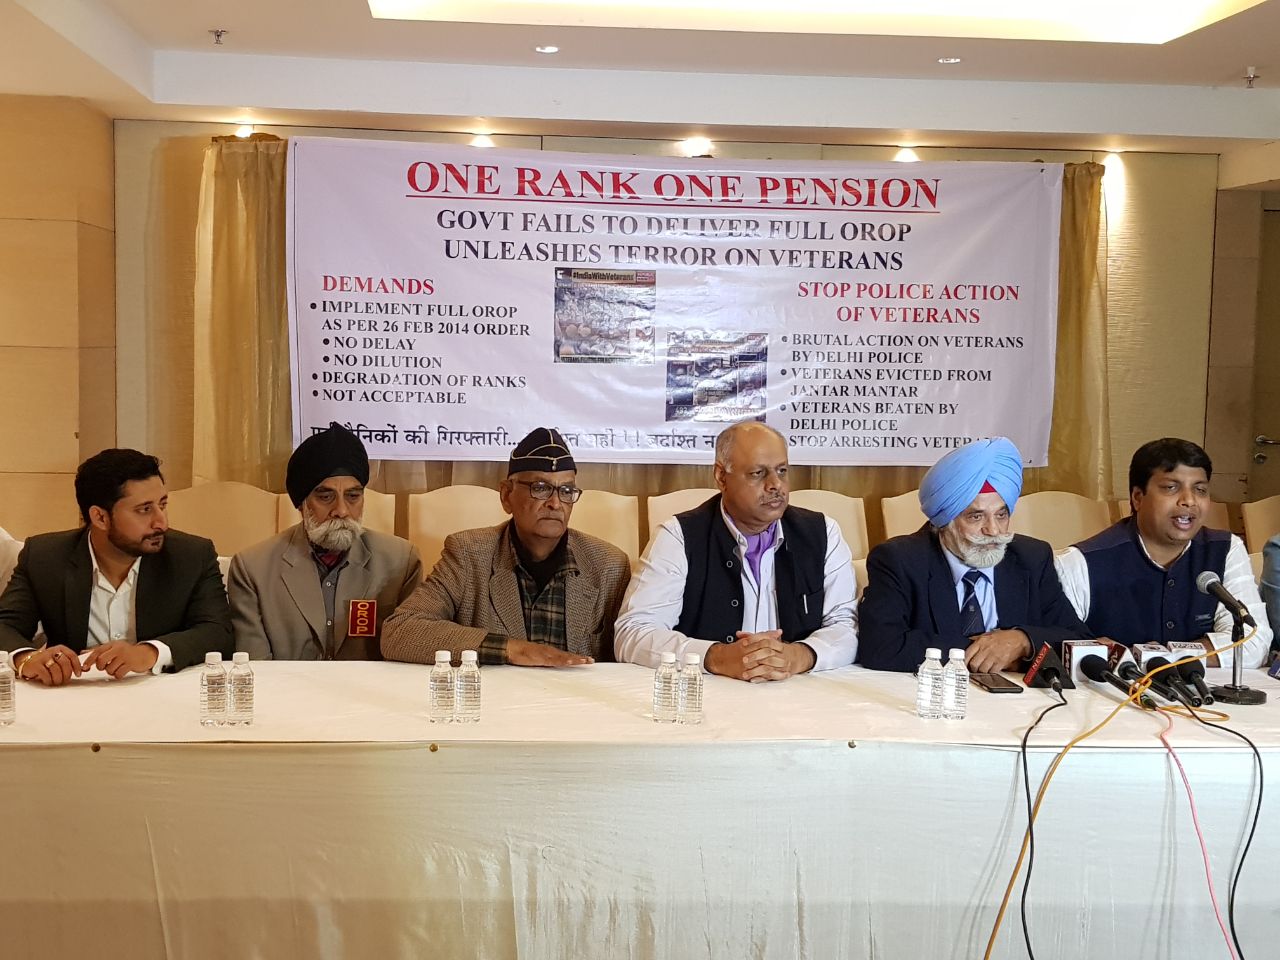 Ex servicemen demanding One Rank OROP attacked Modi government for cheating them